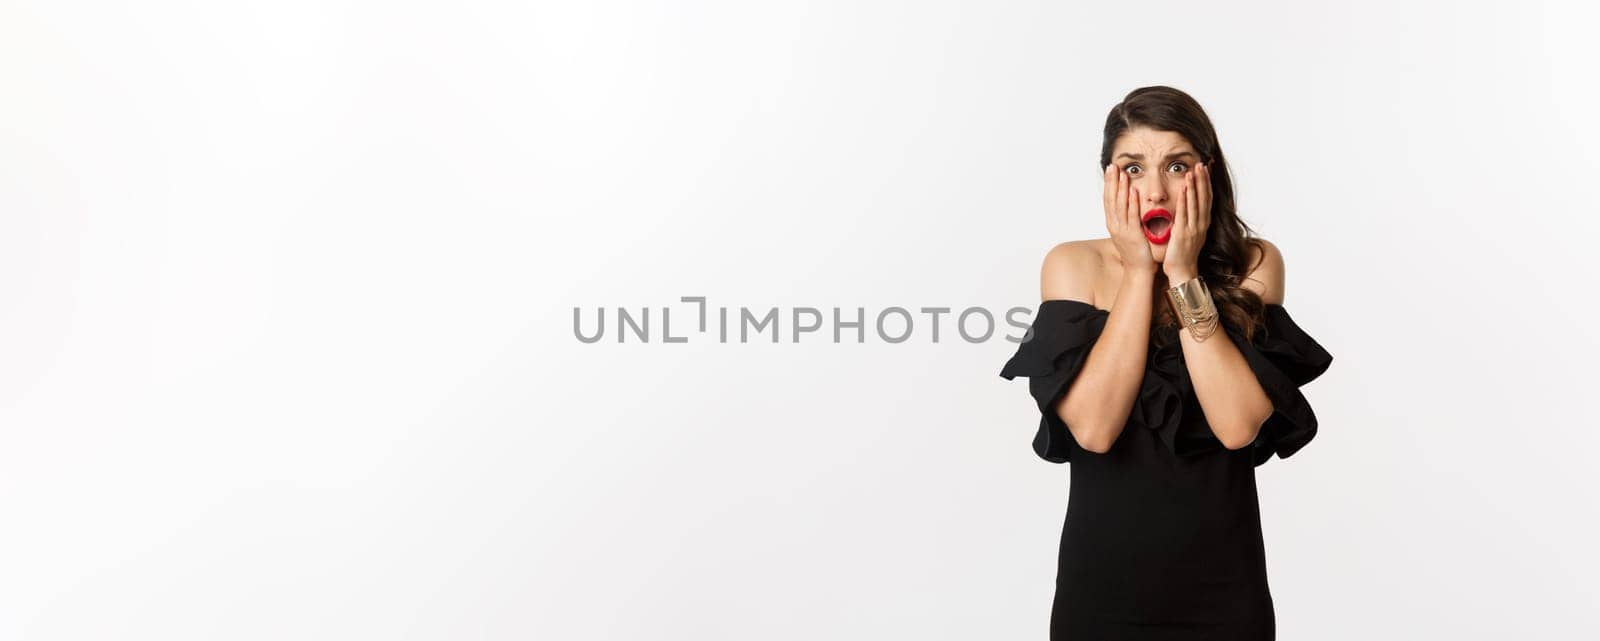 Fashion and beauty. Shocked and worried woman in black dress looking scared, standing anxious over white background.